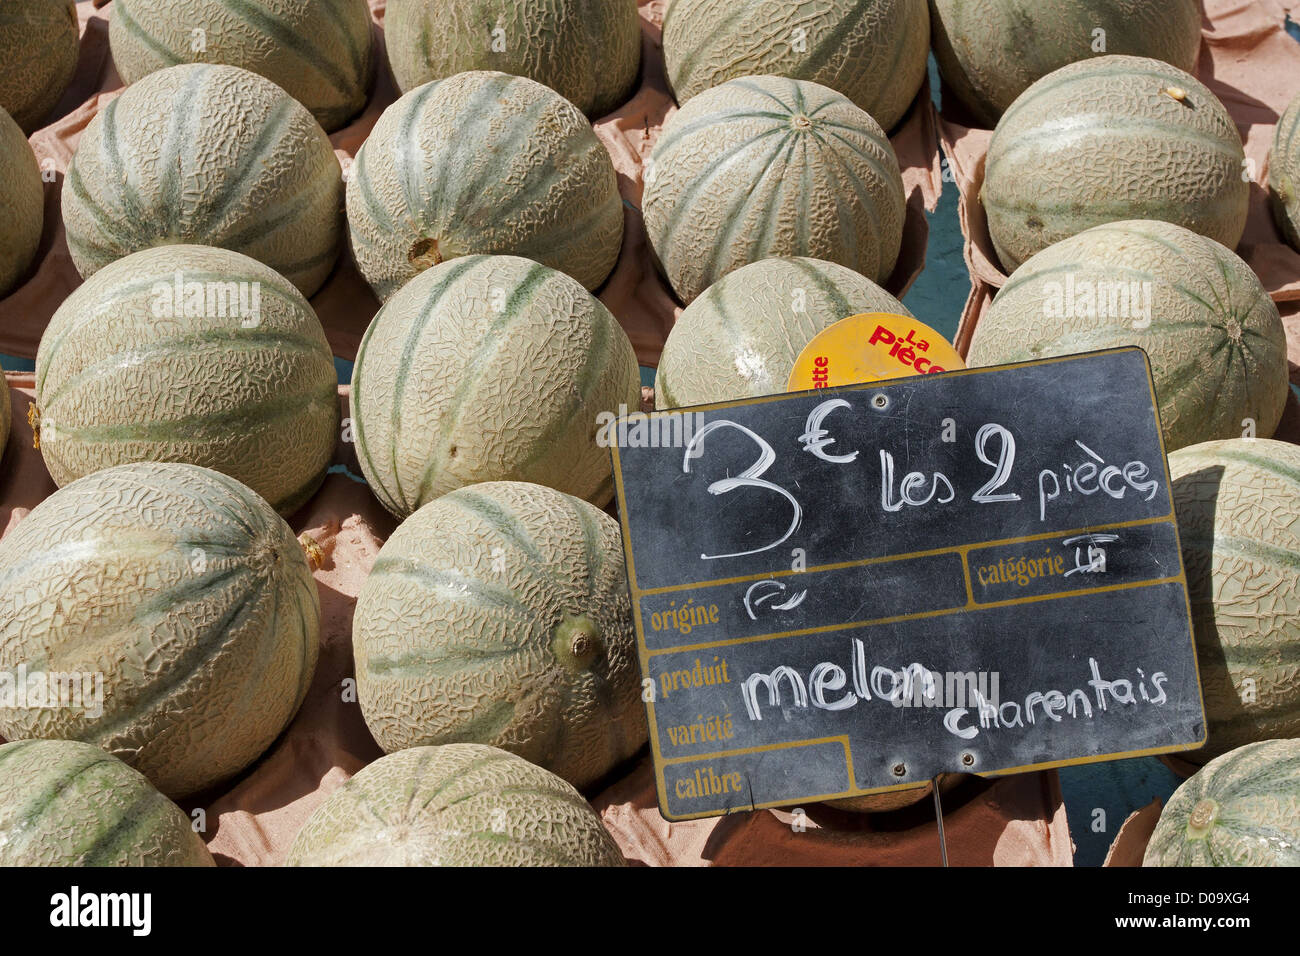 CHARENTAIS MELONS ON A FRUIT SELLER'S STALL IN THE MARKET OF ALLEVARD ISERE RHONE-ALPES FRANCE Stock Photo